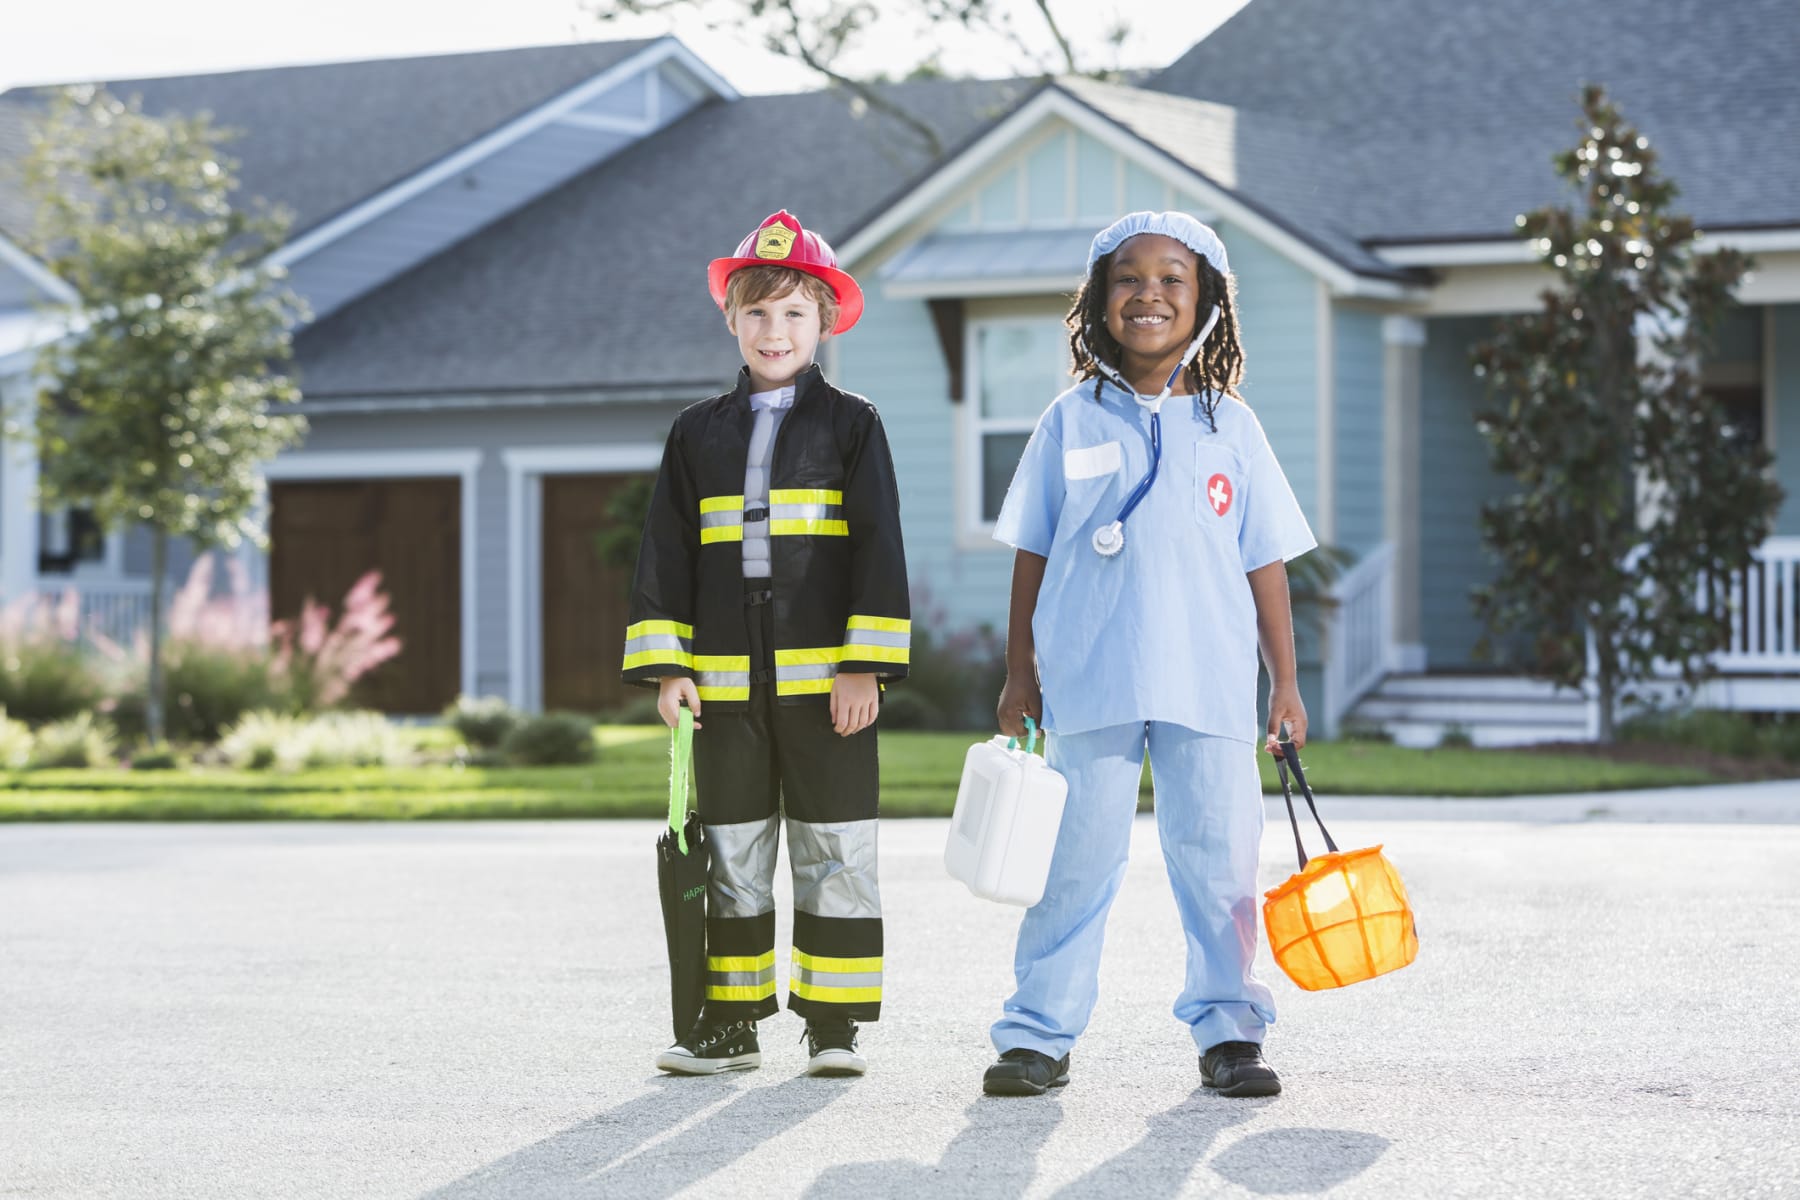 Children in Halloween costumes stand on residential street.